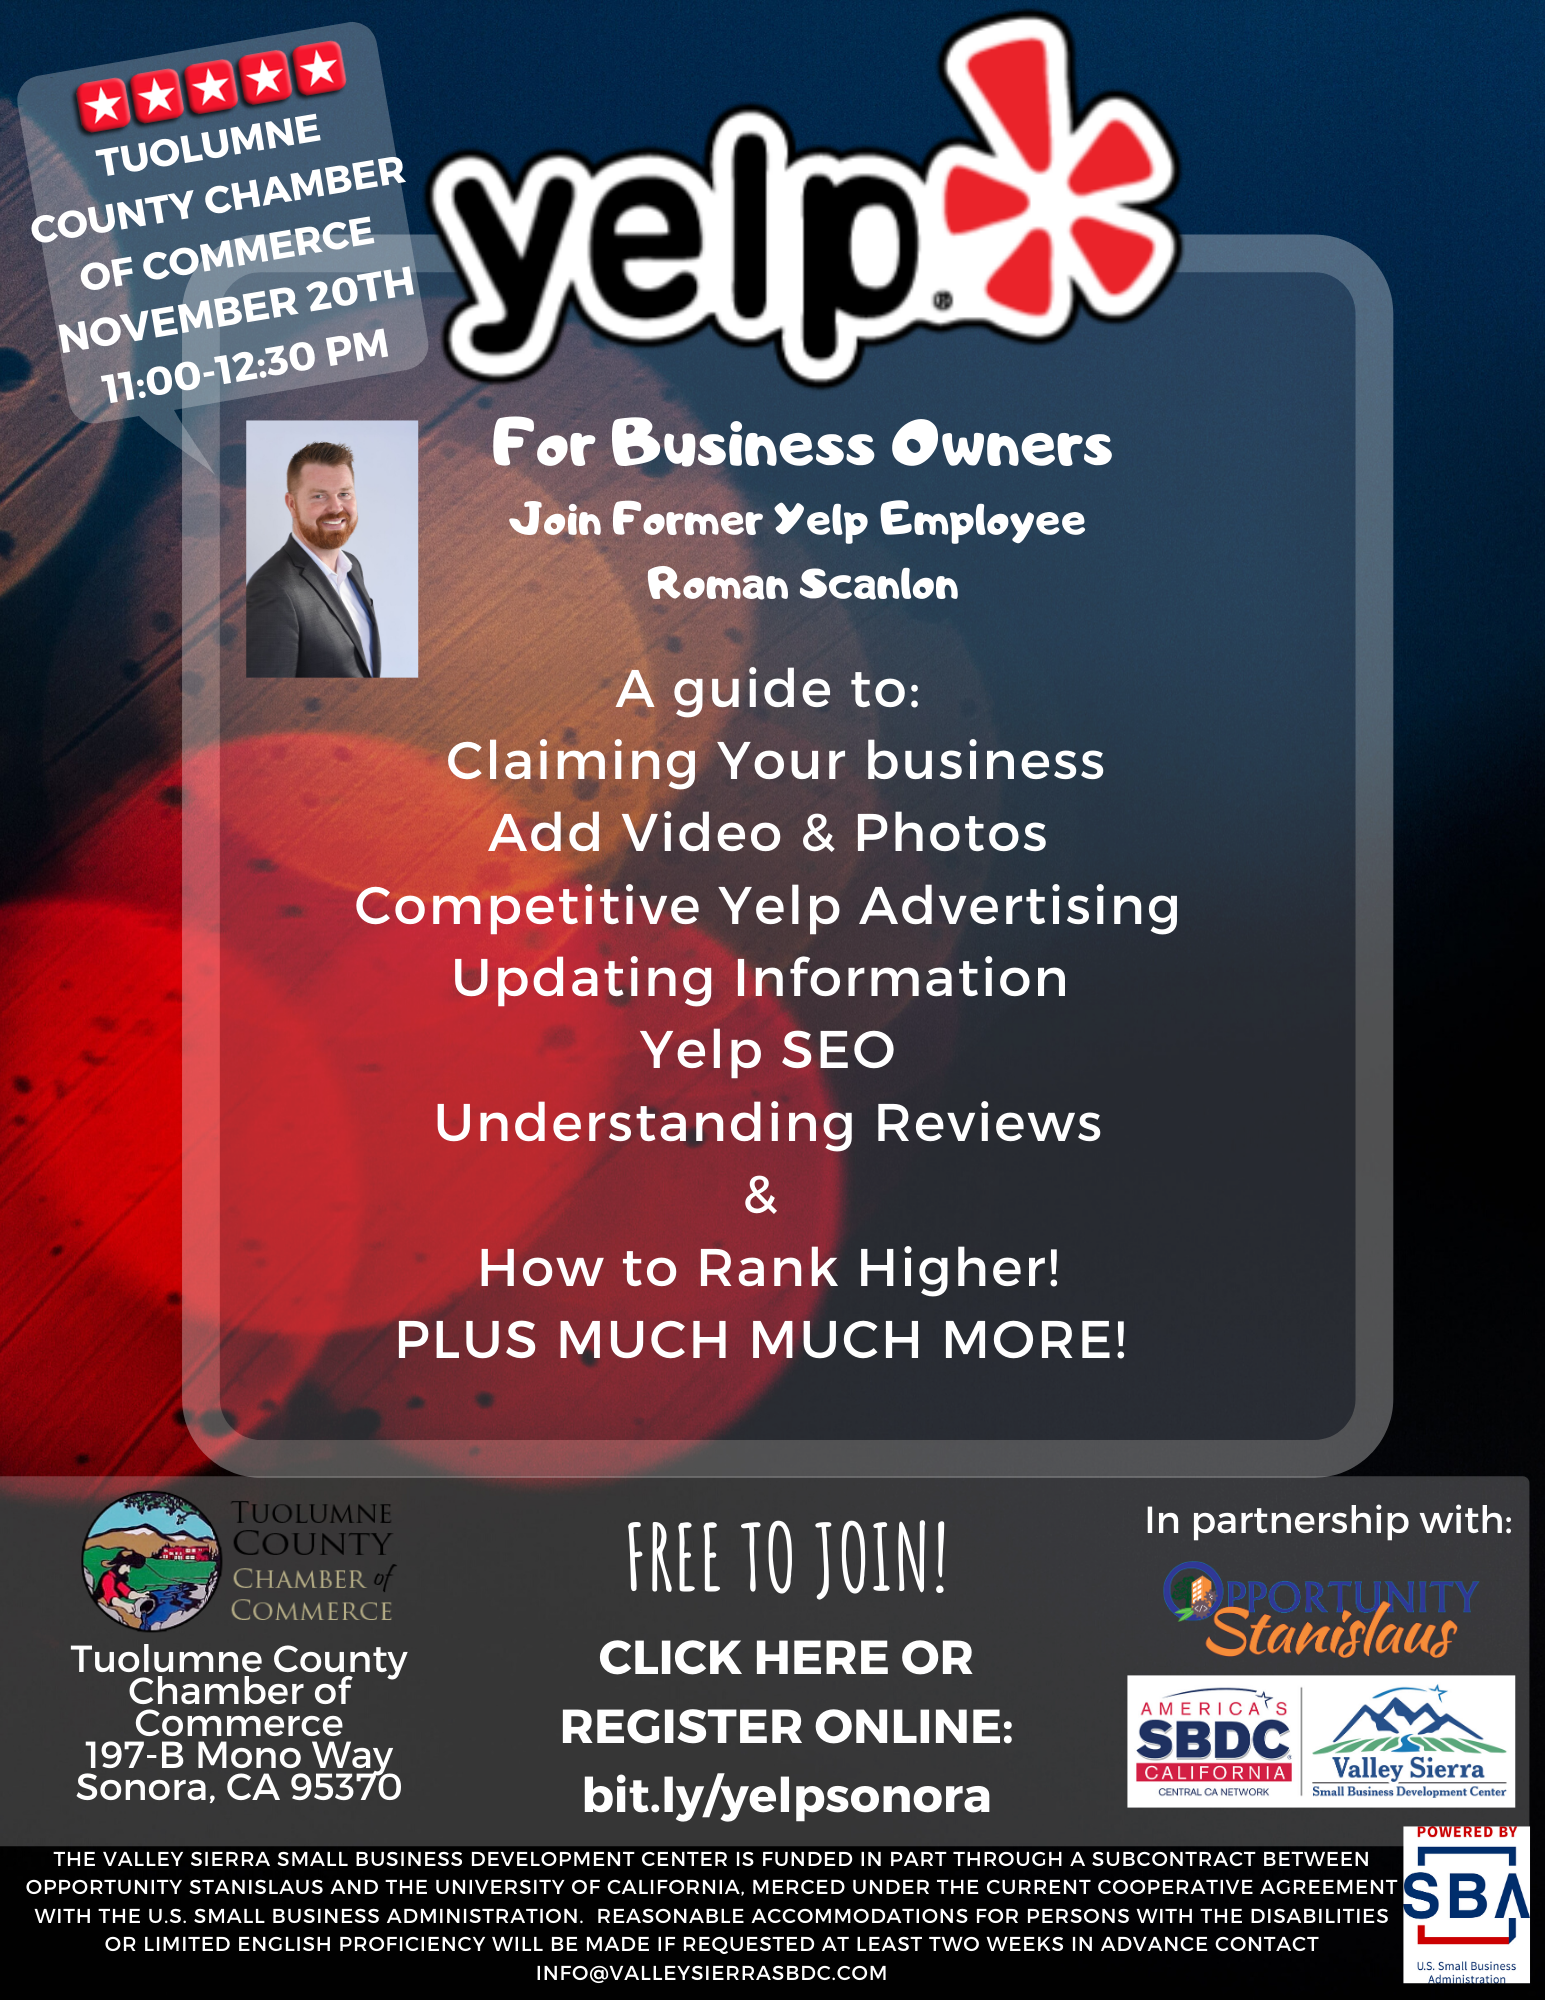 Yelp Business Flyer hosted by Valley Sierra SBDC & Tuolumne County Chamber of Commerce